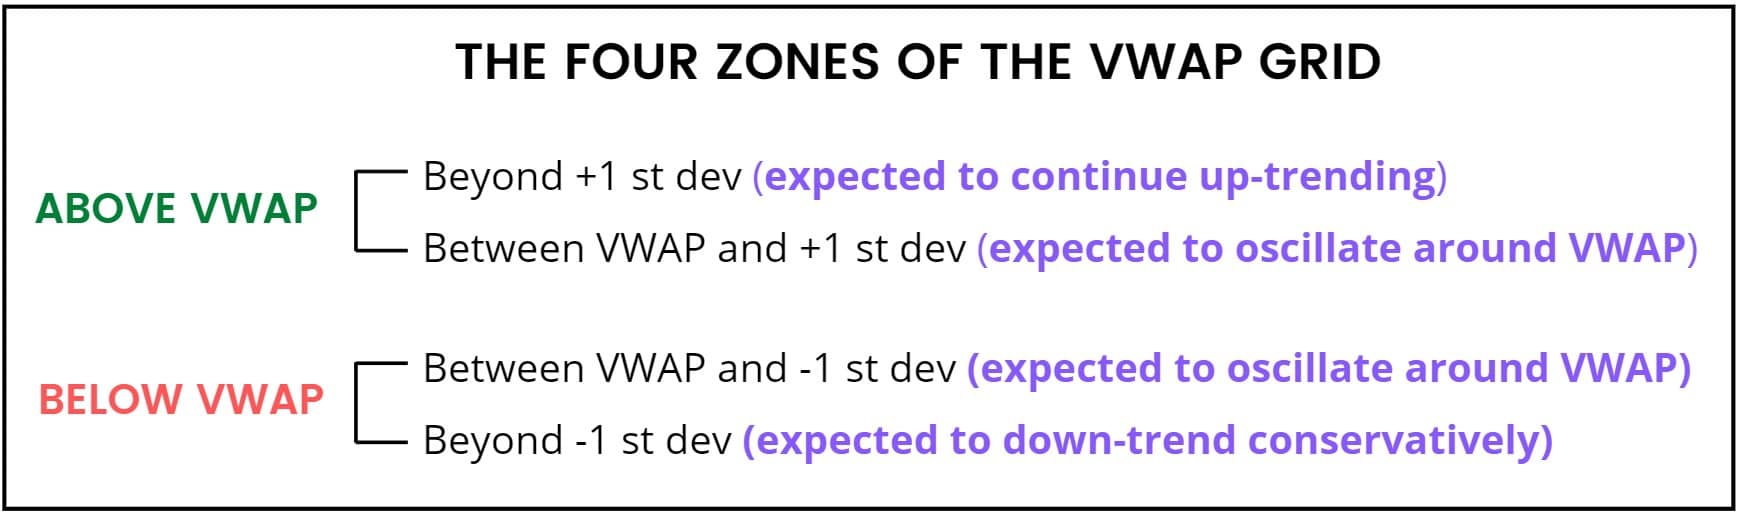 Trading With VWAP: Four Zones of the VWAP Grid